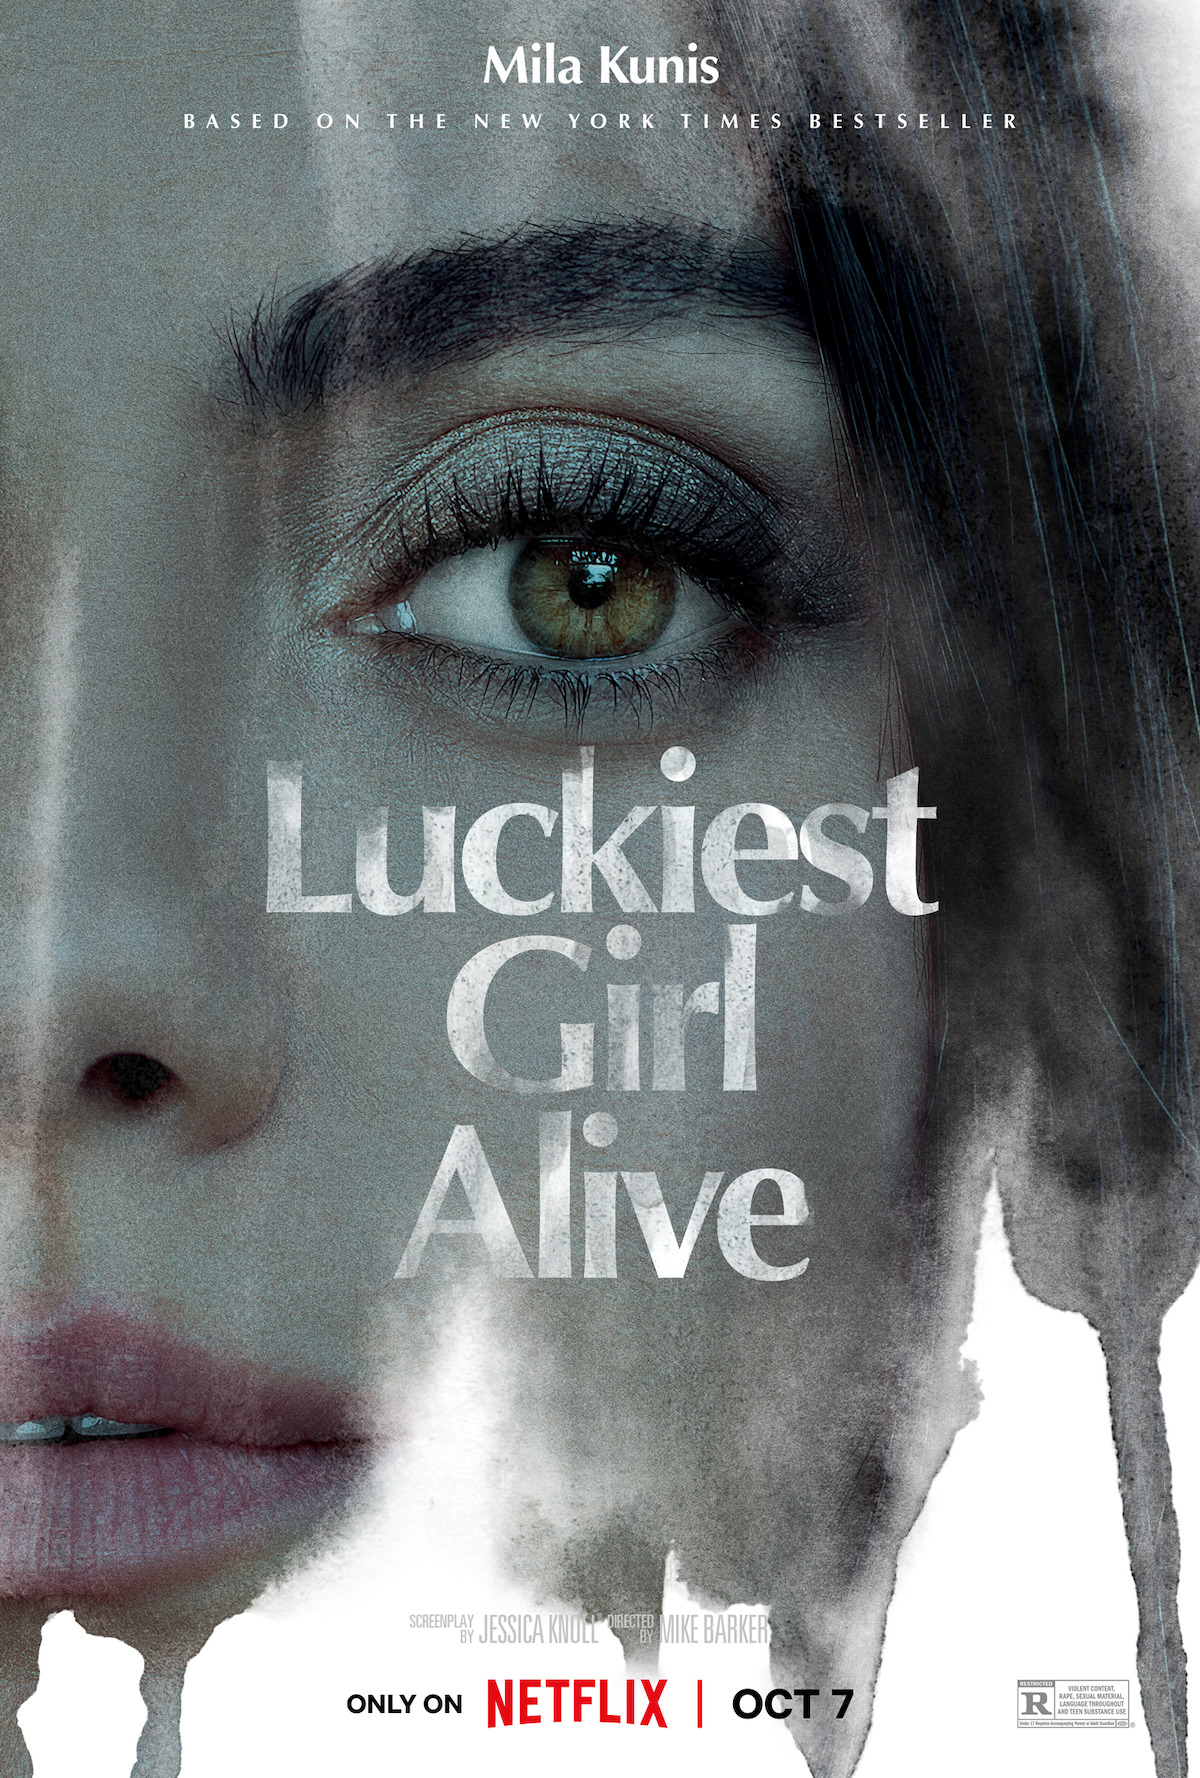 Luckiest Girl Alive Trailer and First Look Photos Dropped